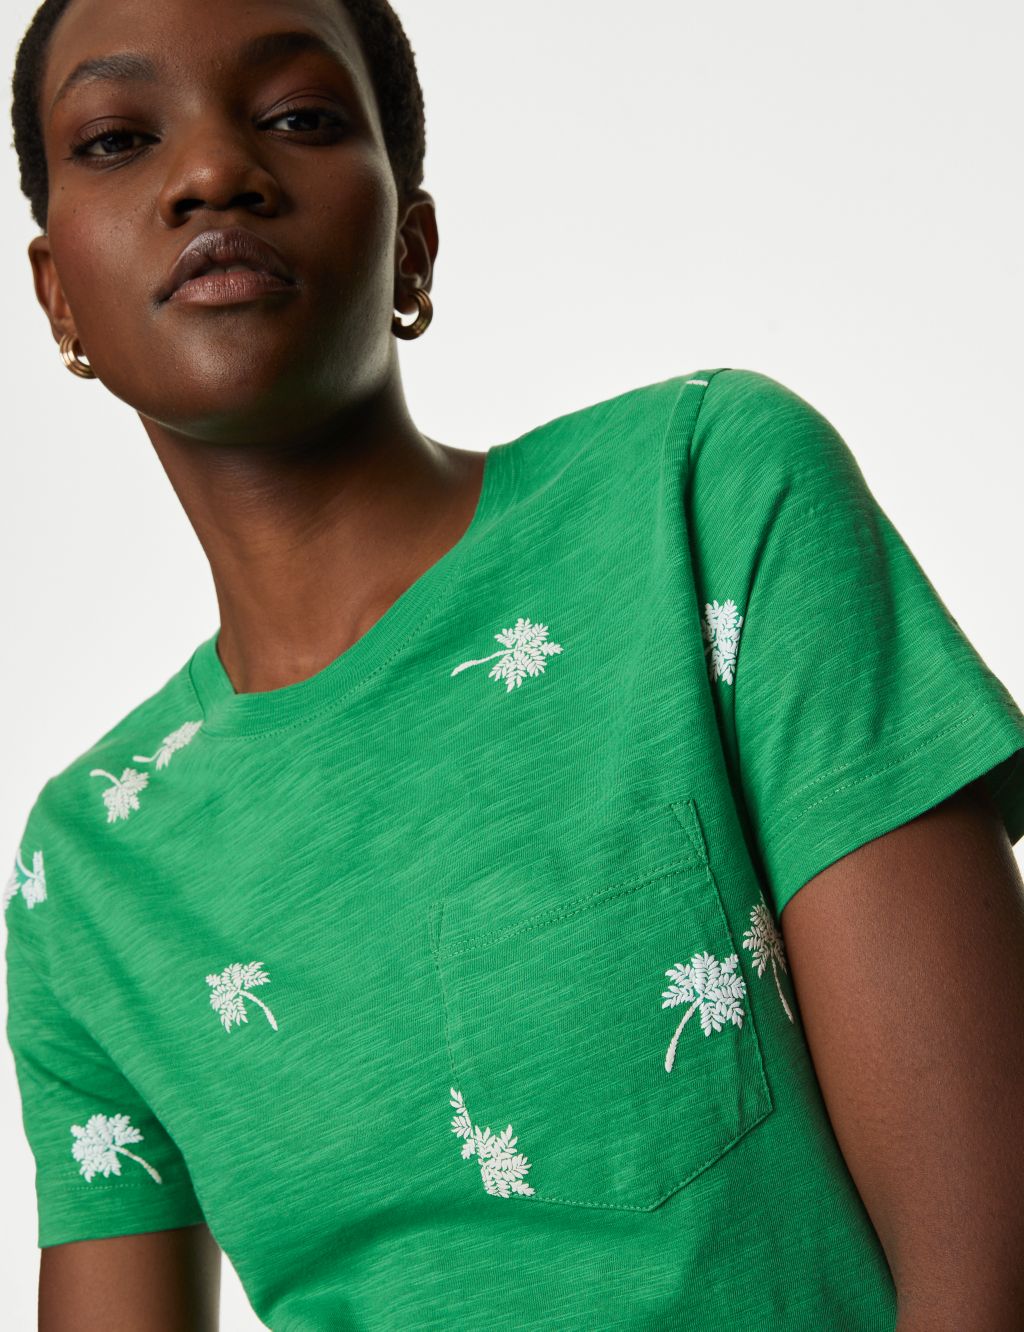 Pure Cotton Printed Pocket Top